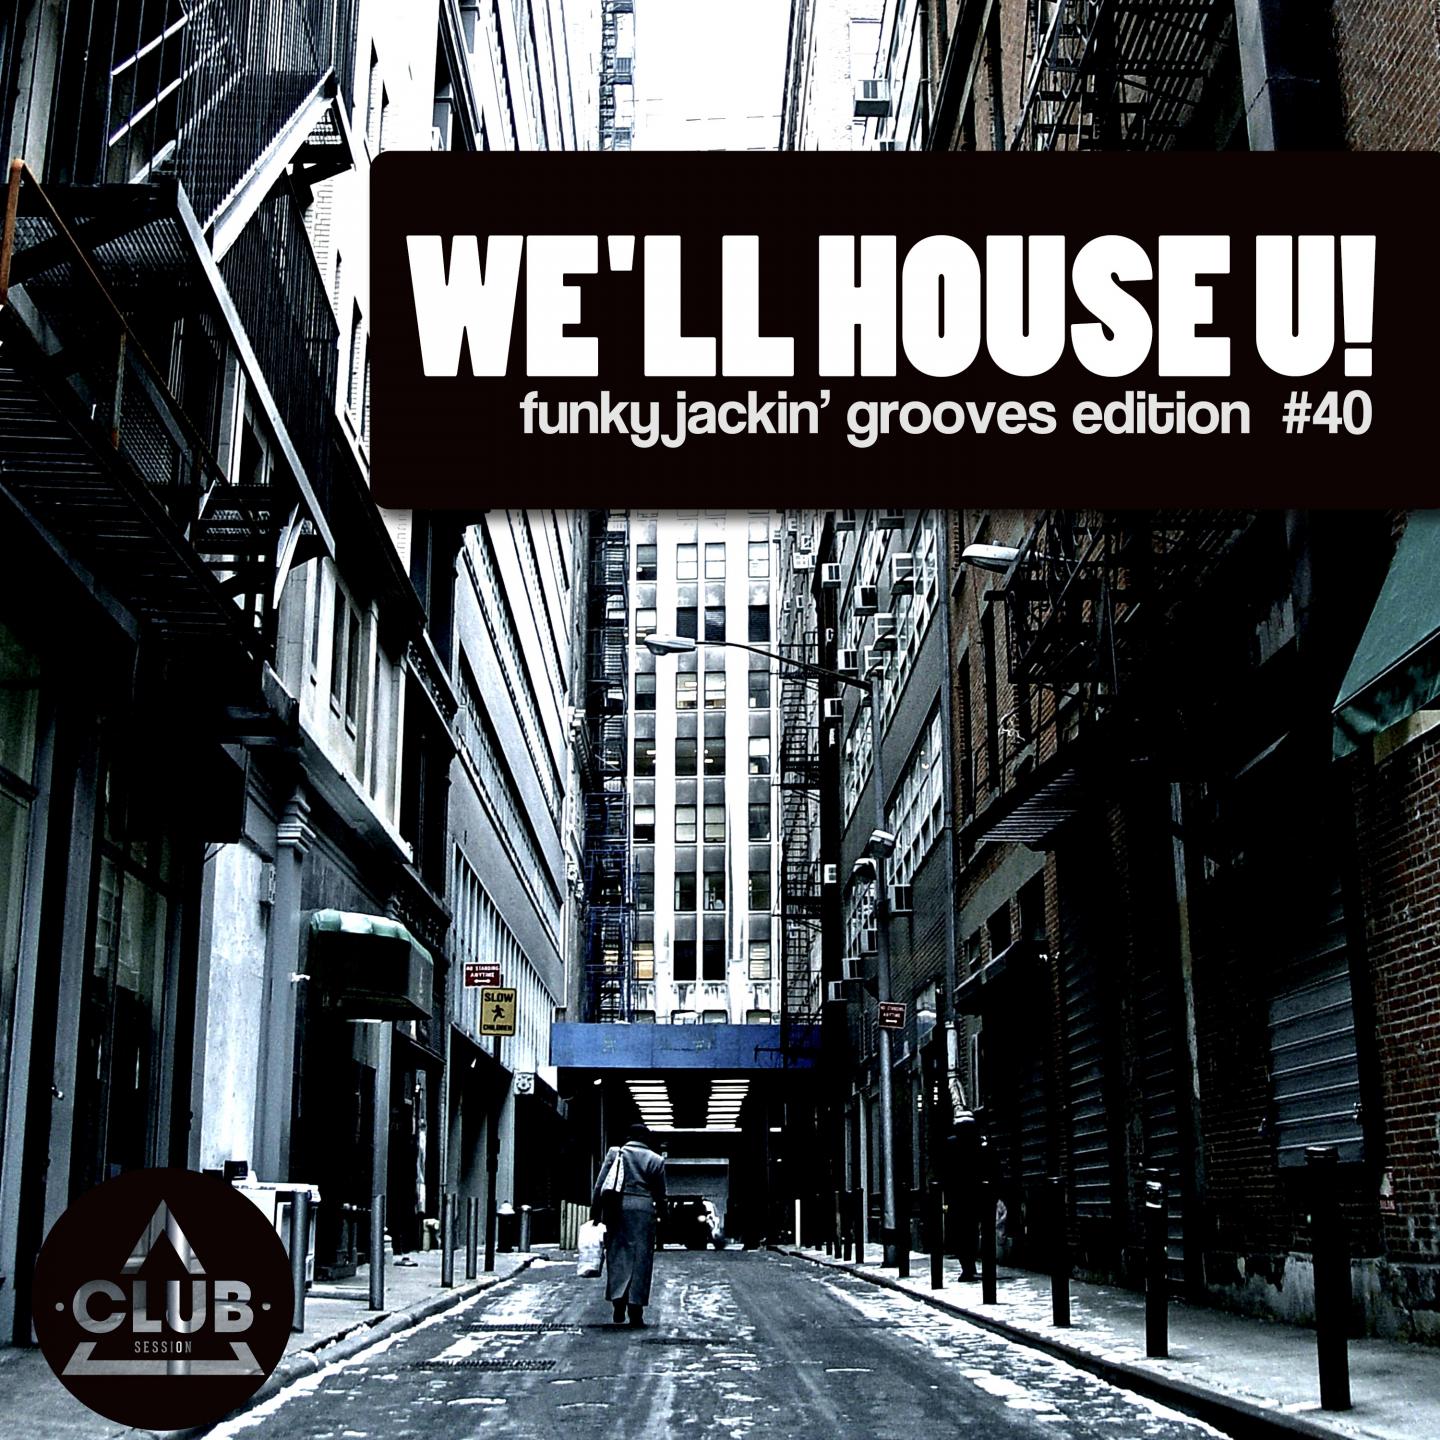 We'll House U! - Funky Jackin' Grooves Edition, Vol. 40